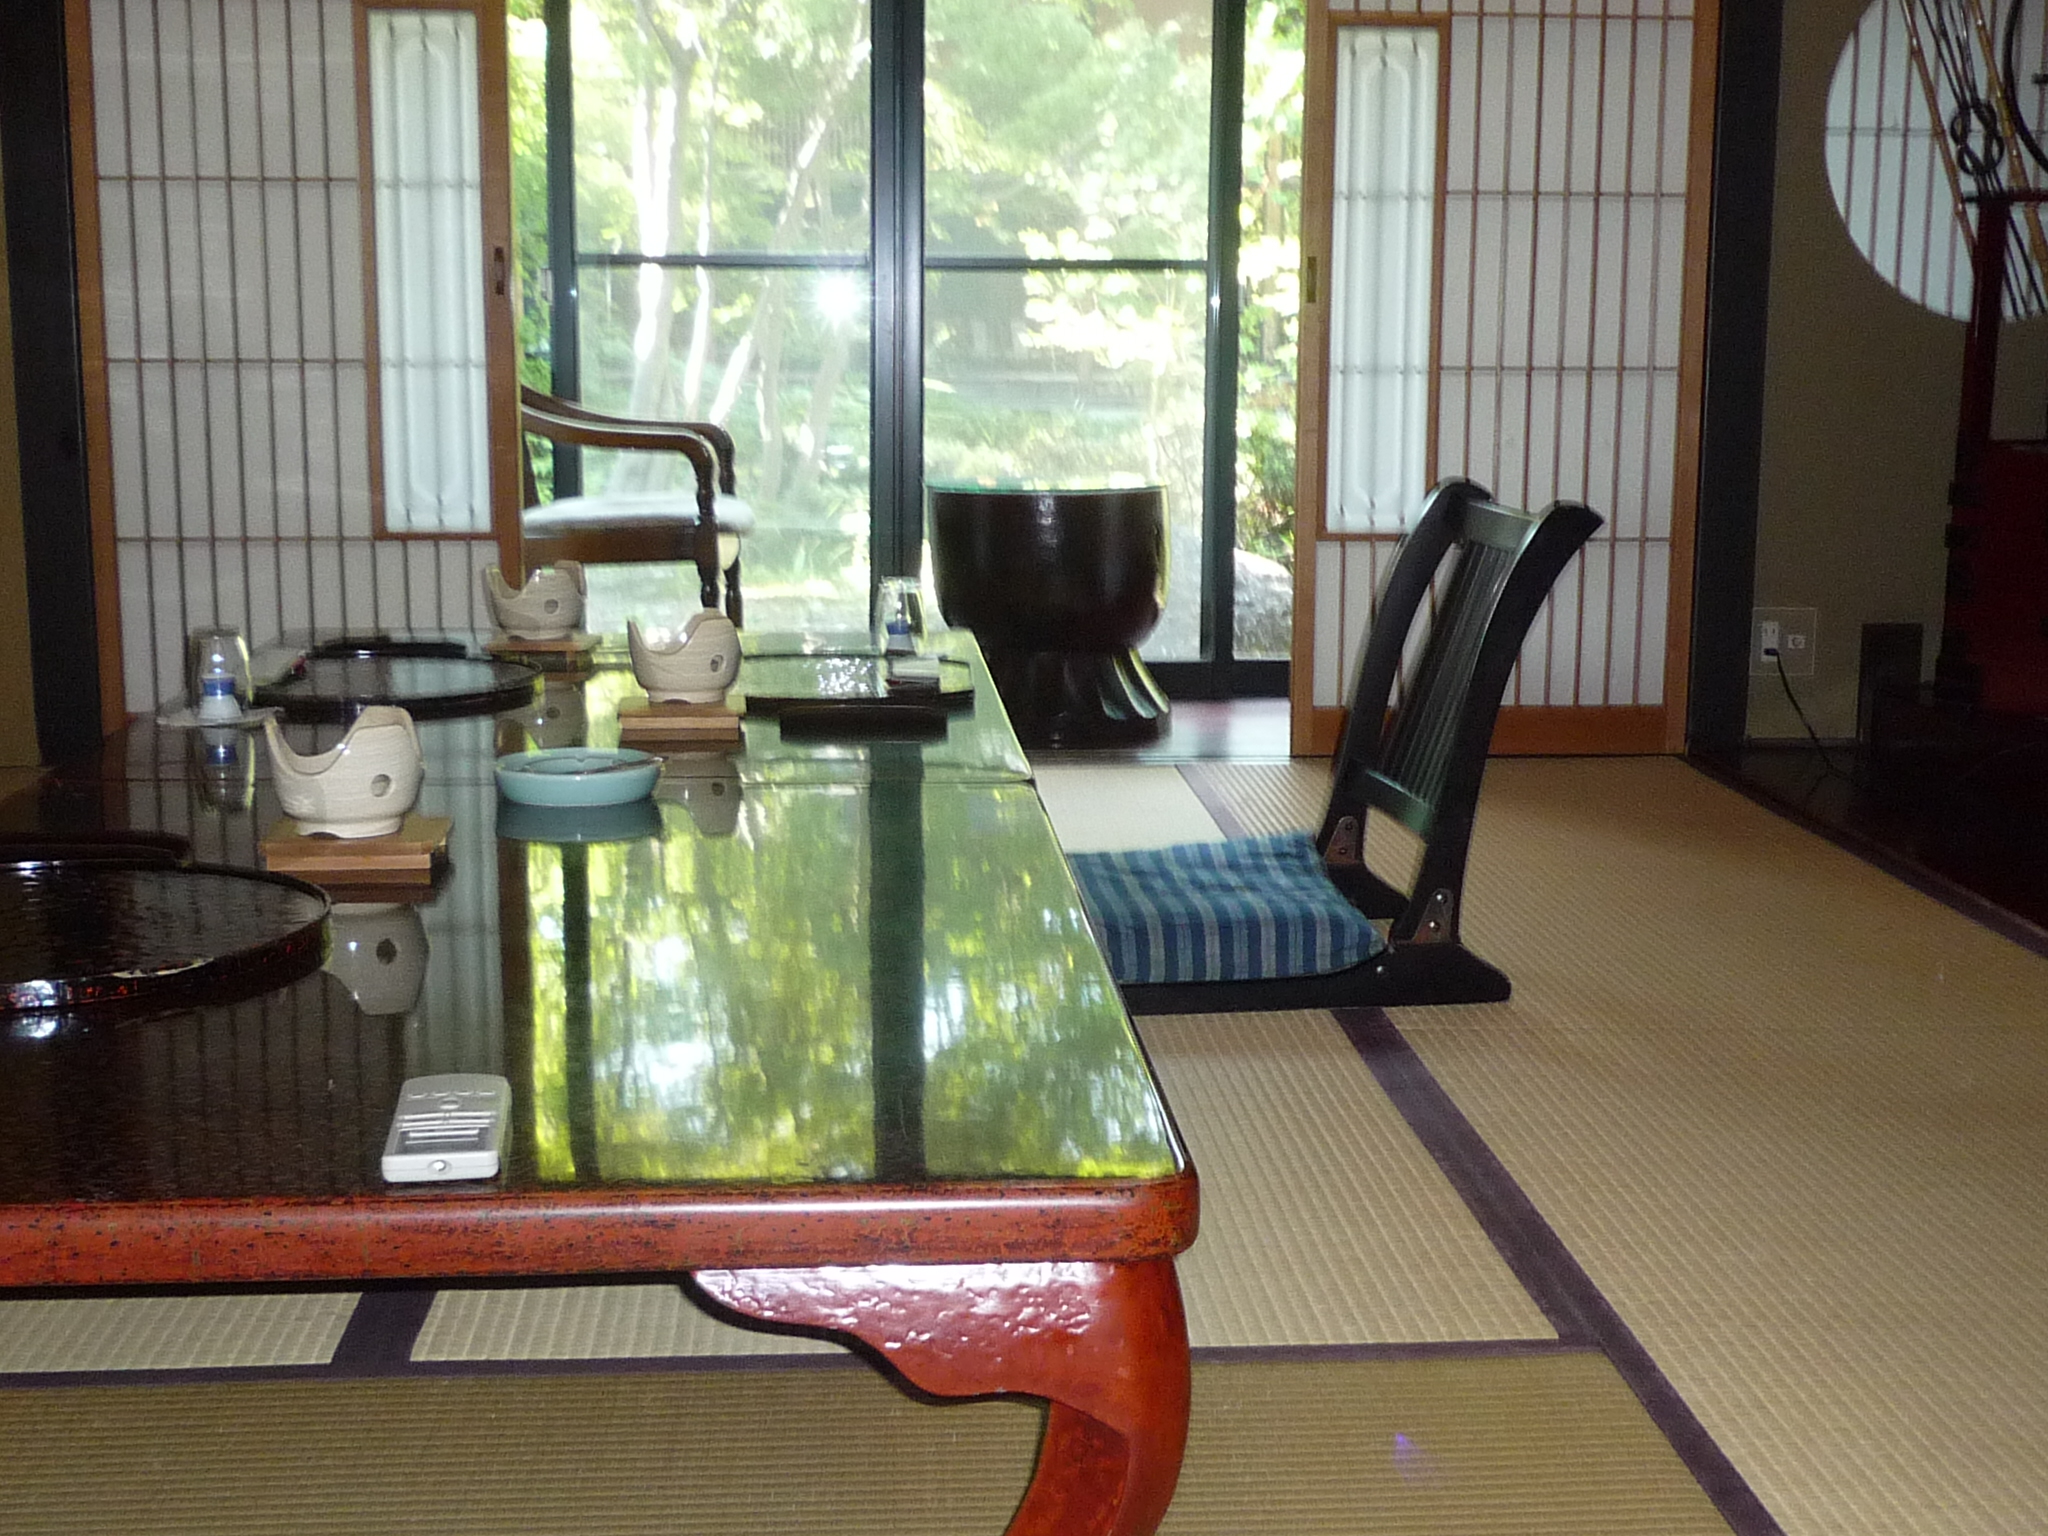 Ryokan-Traditional Japanese style inns with Tatami floors and Futon beds